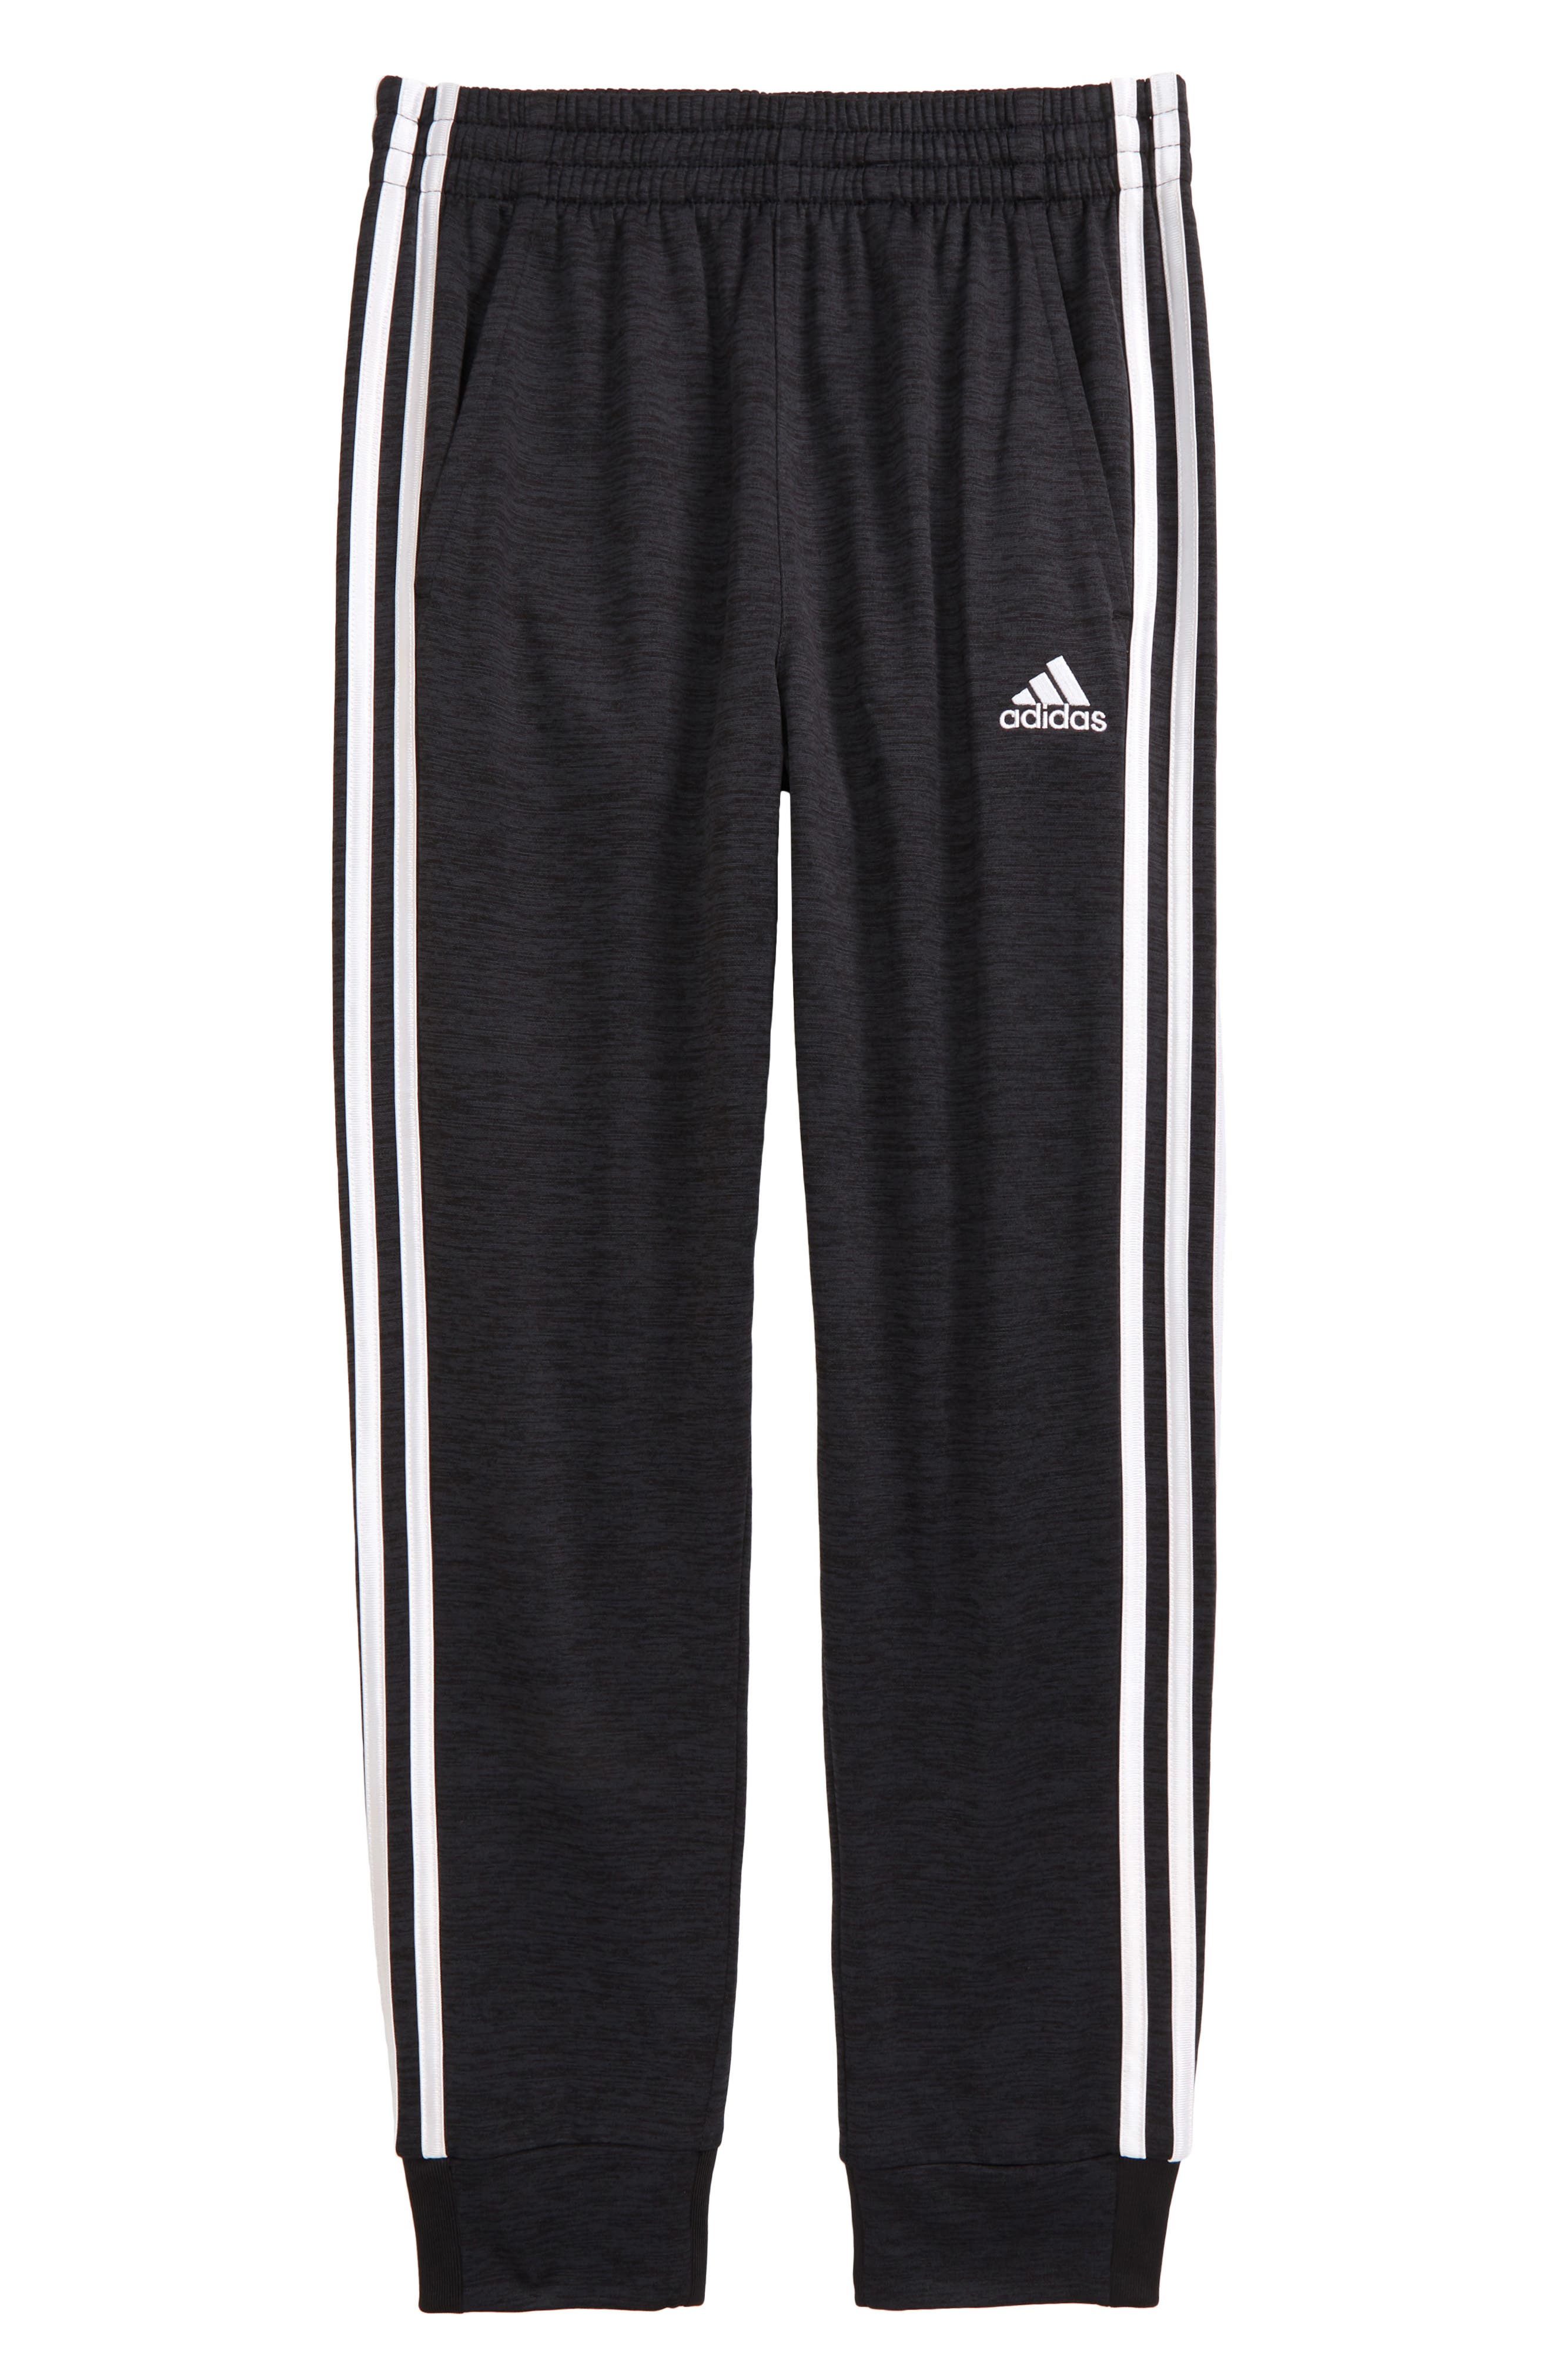 white adidas joggers with black stripes